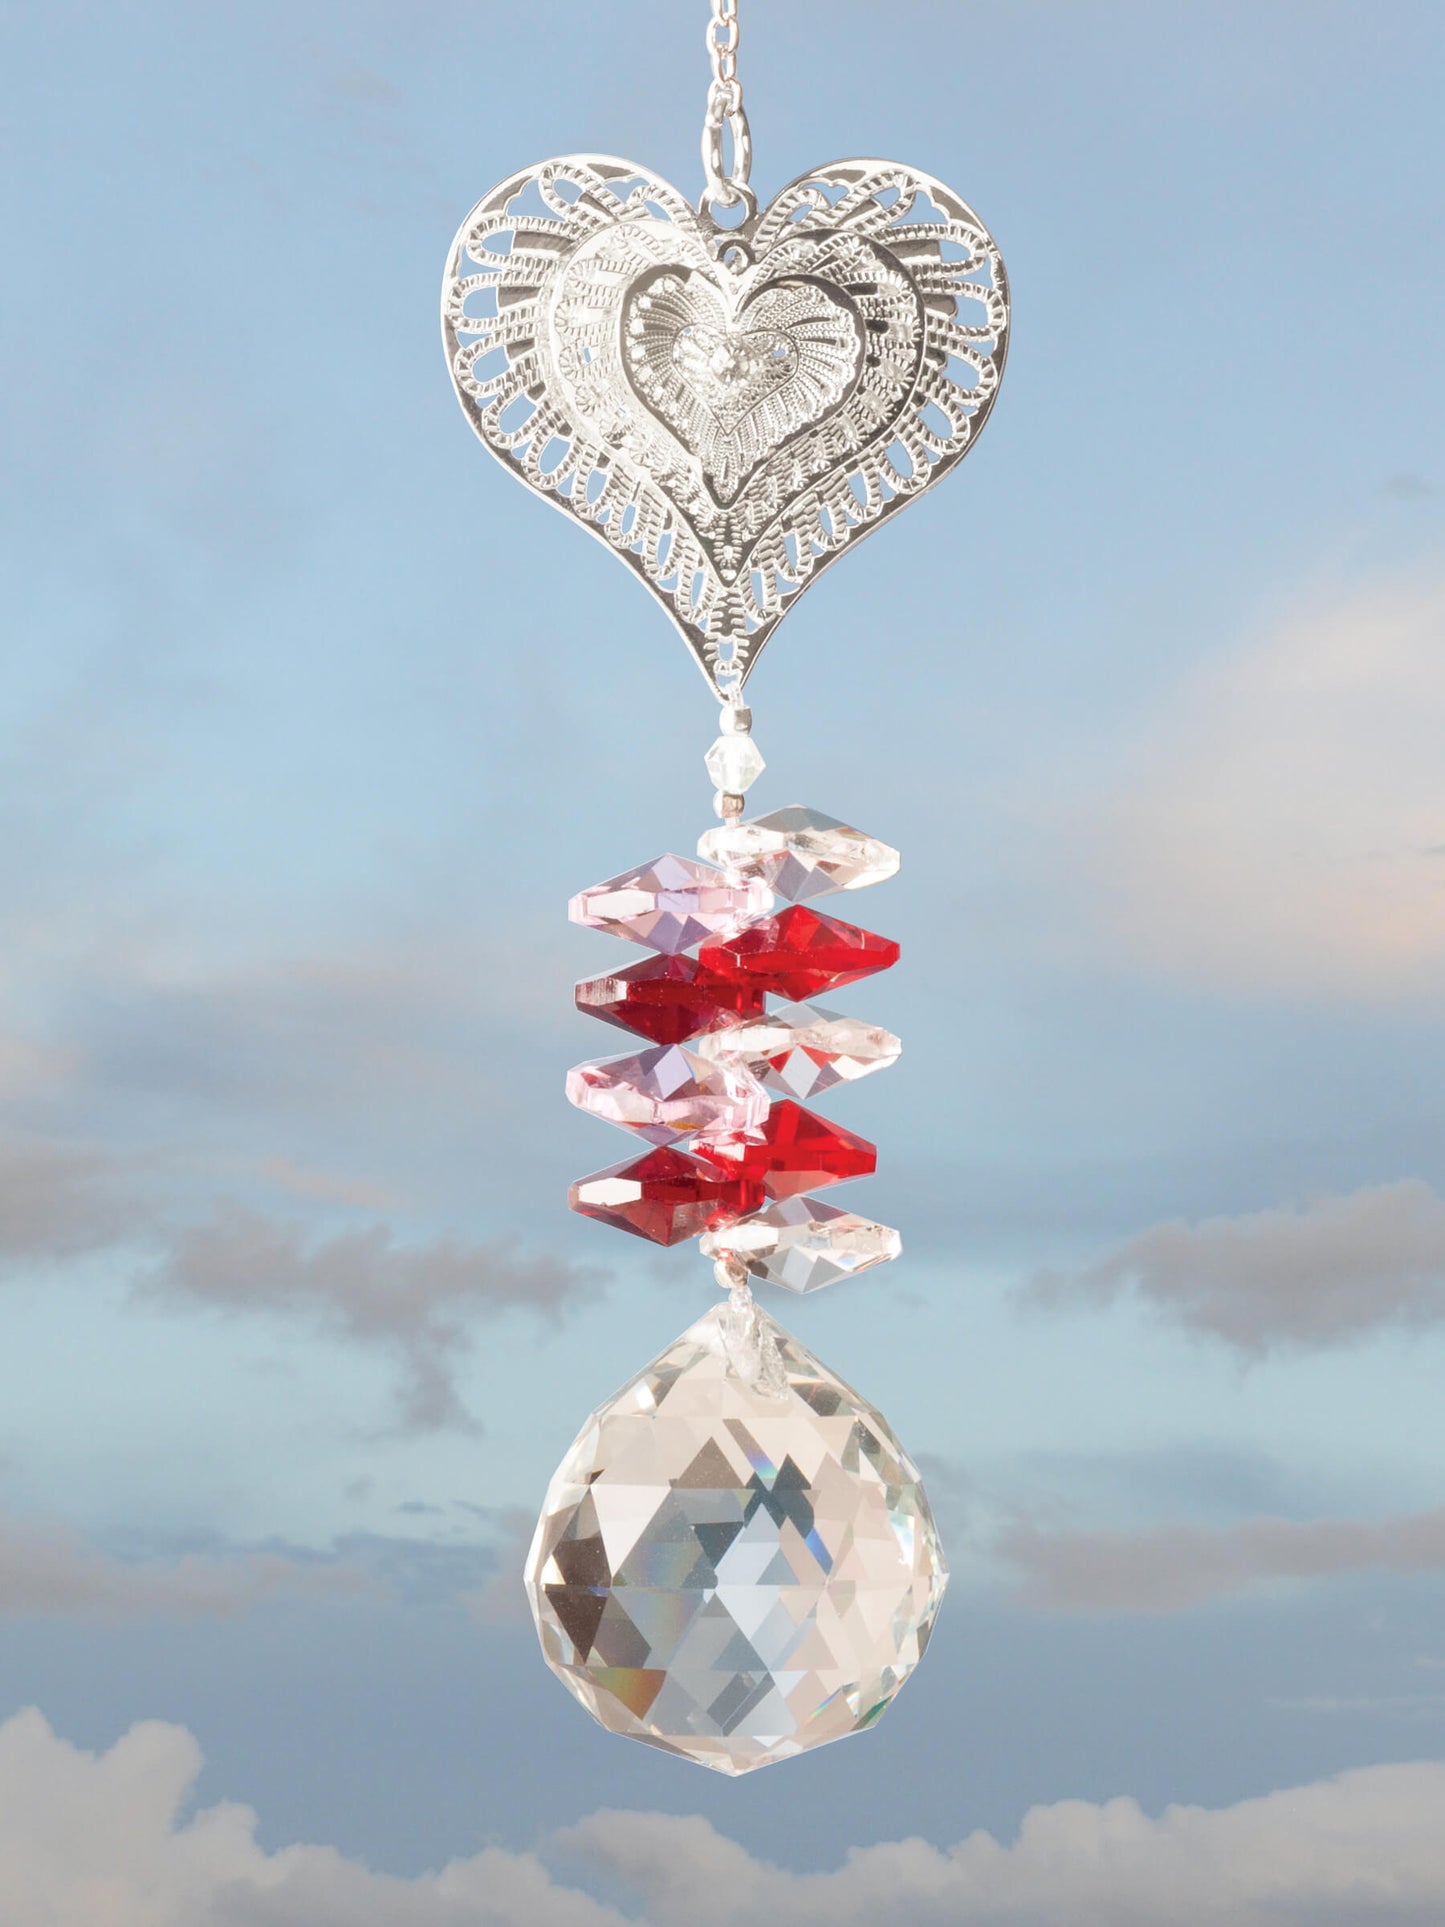 Heart design suncatcher, DIY kit with crystal beads and silvery finish metal parts.